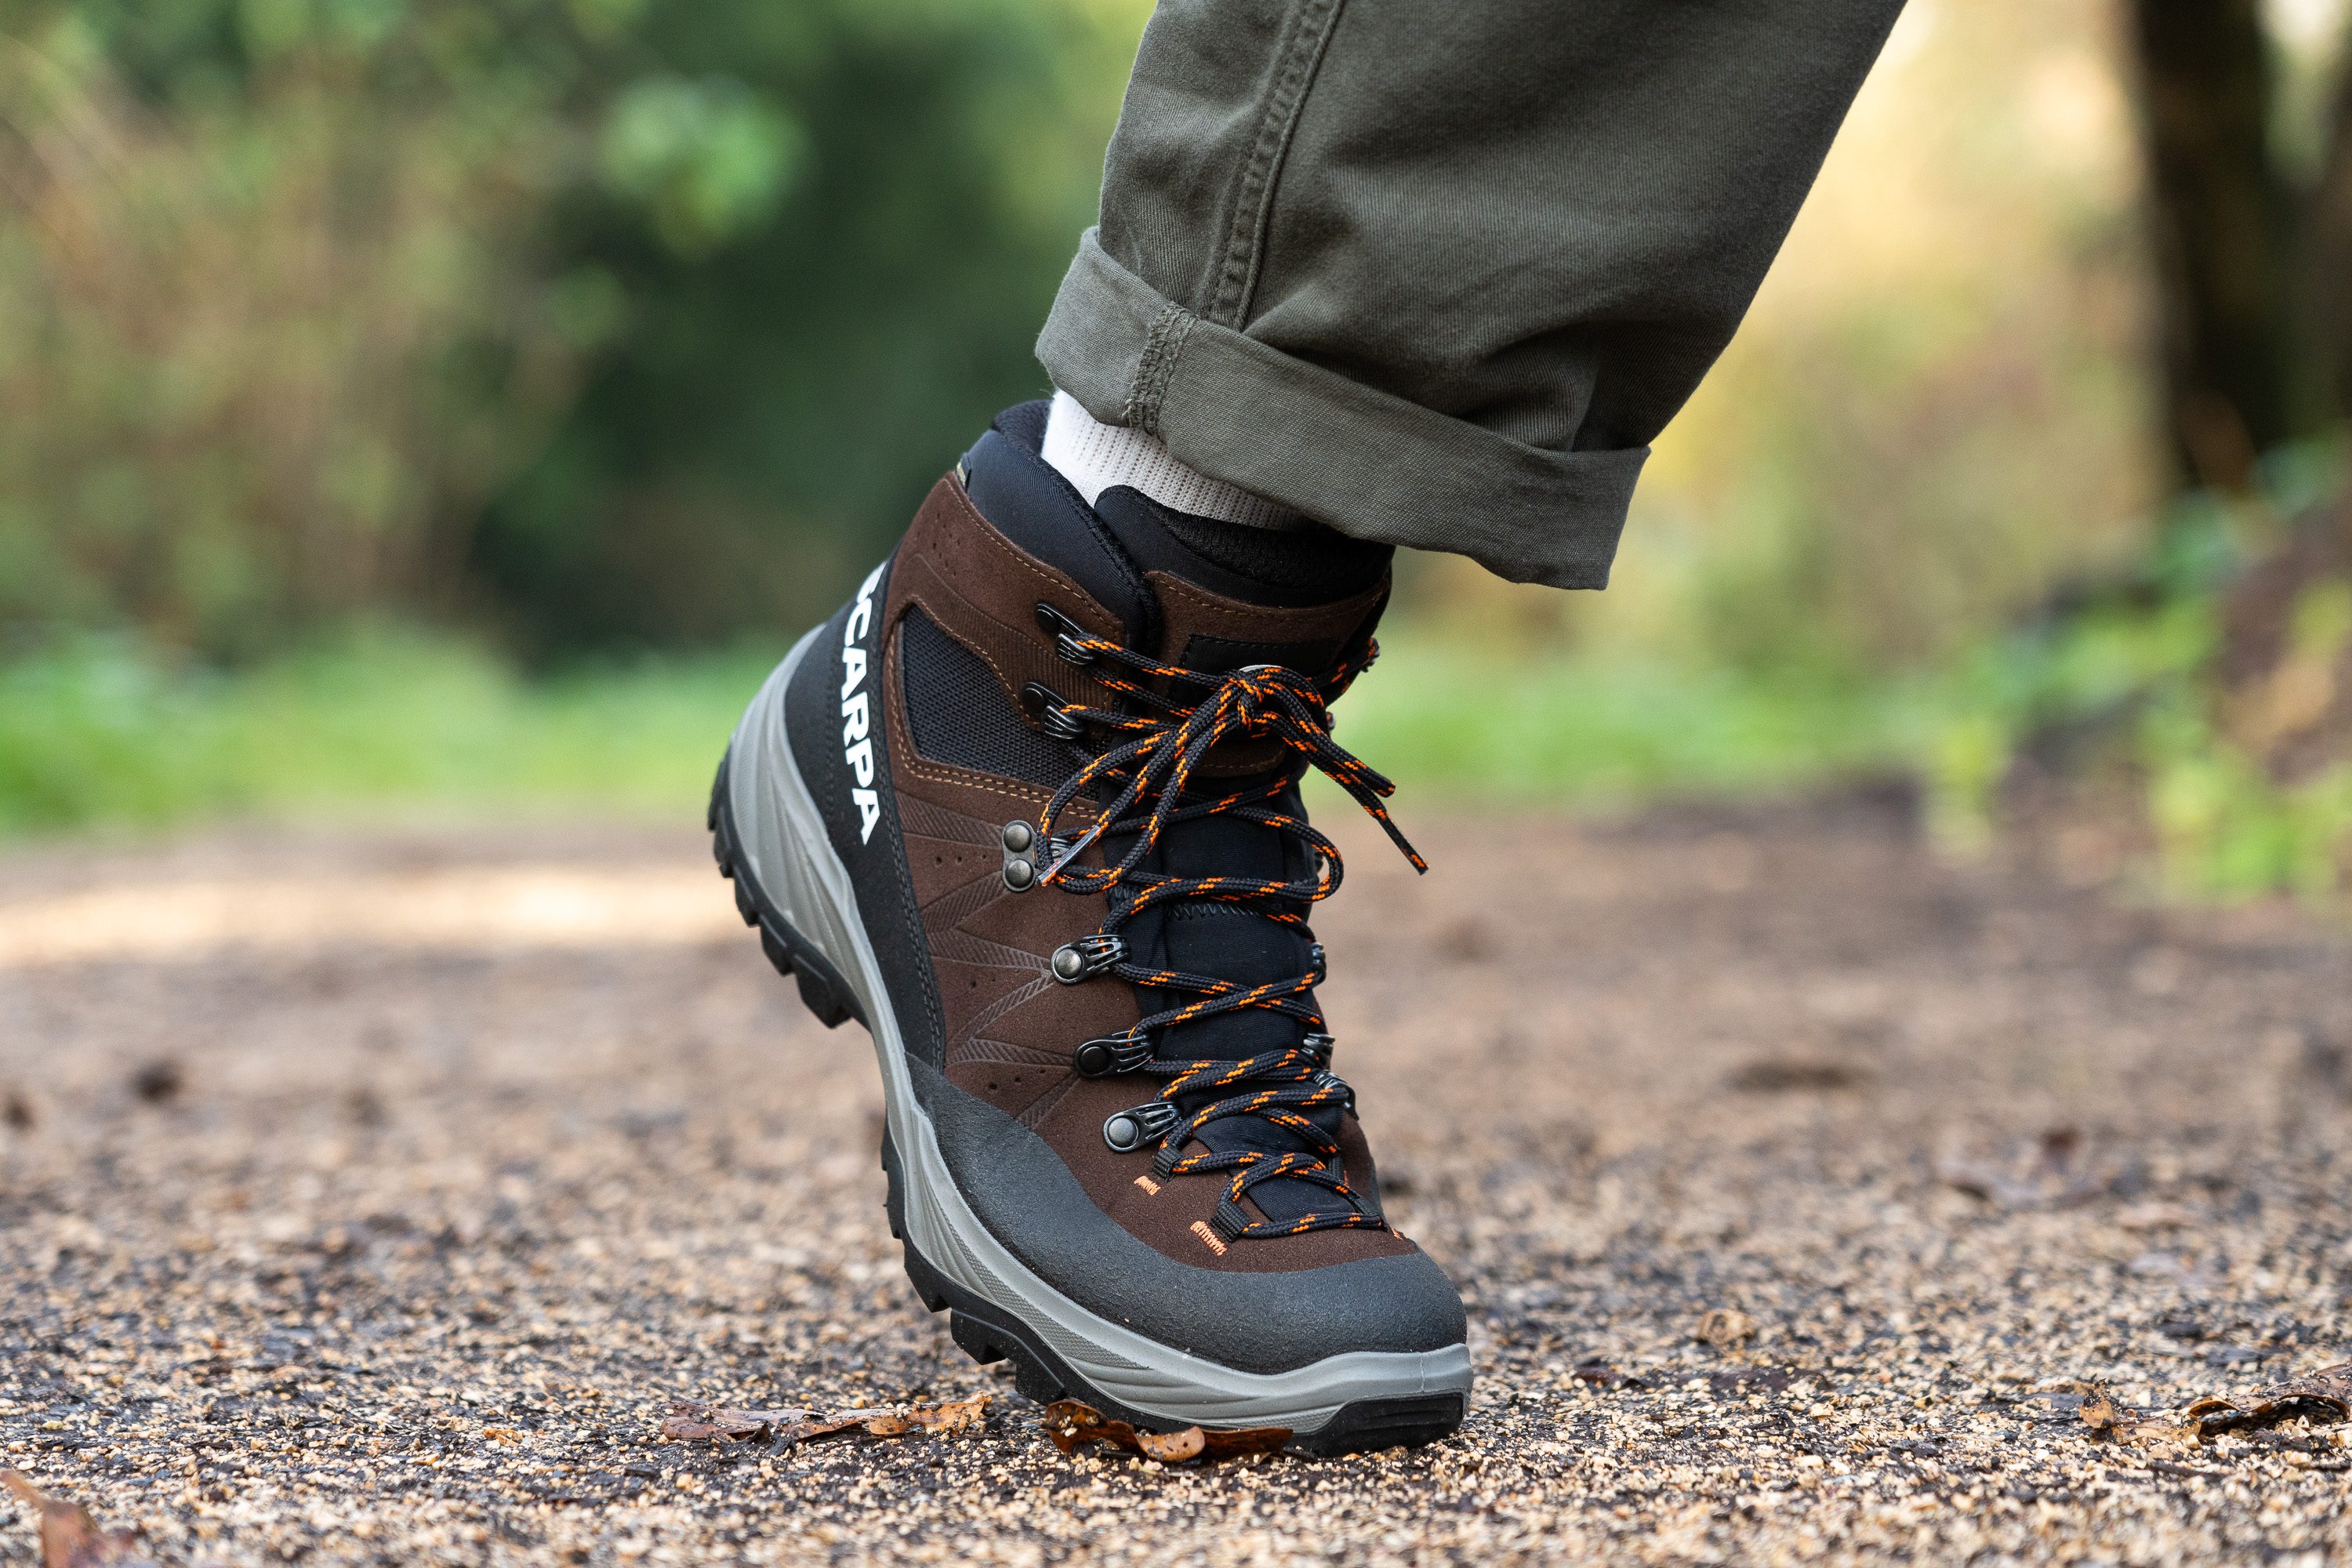 We recommend the Boreas GTX as an excellent choice for Stiffness